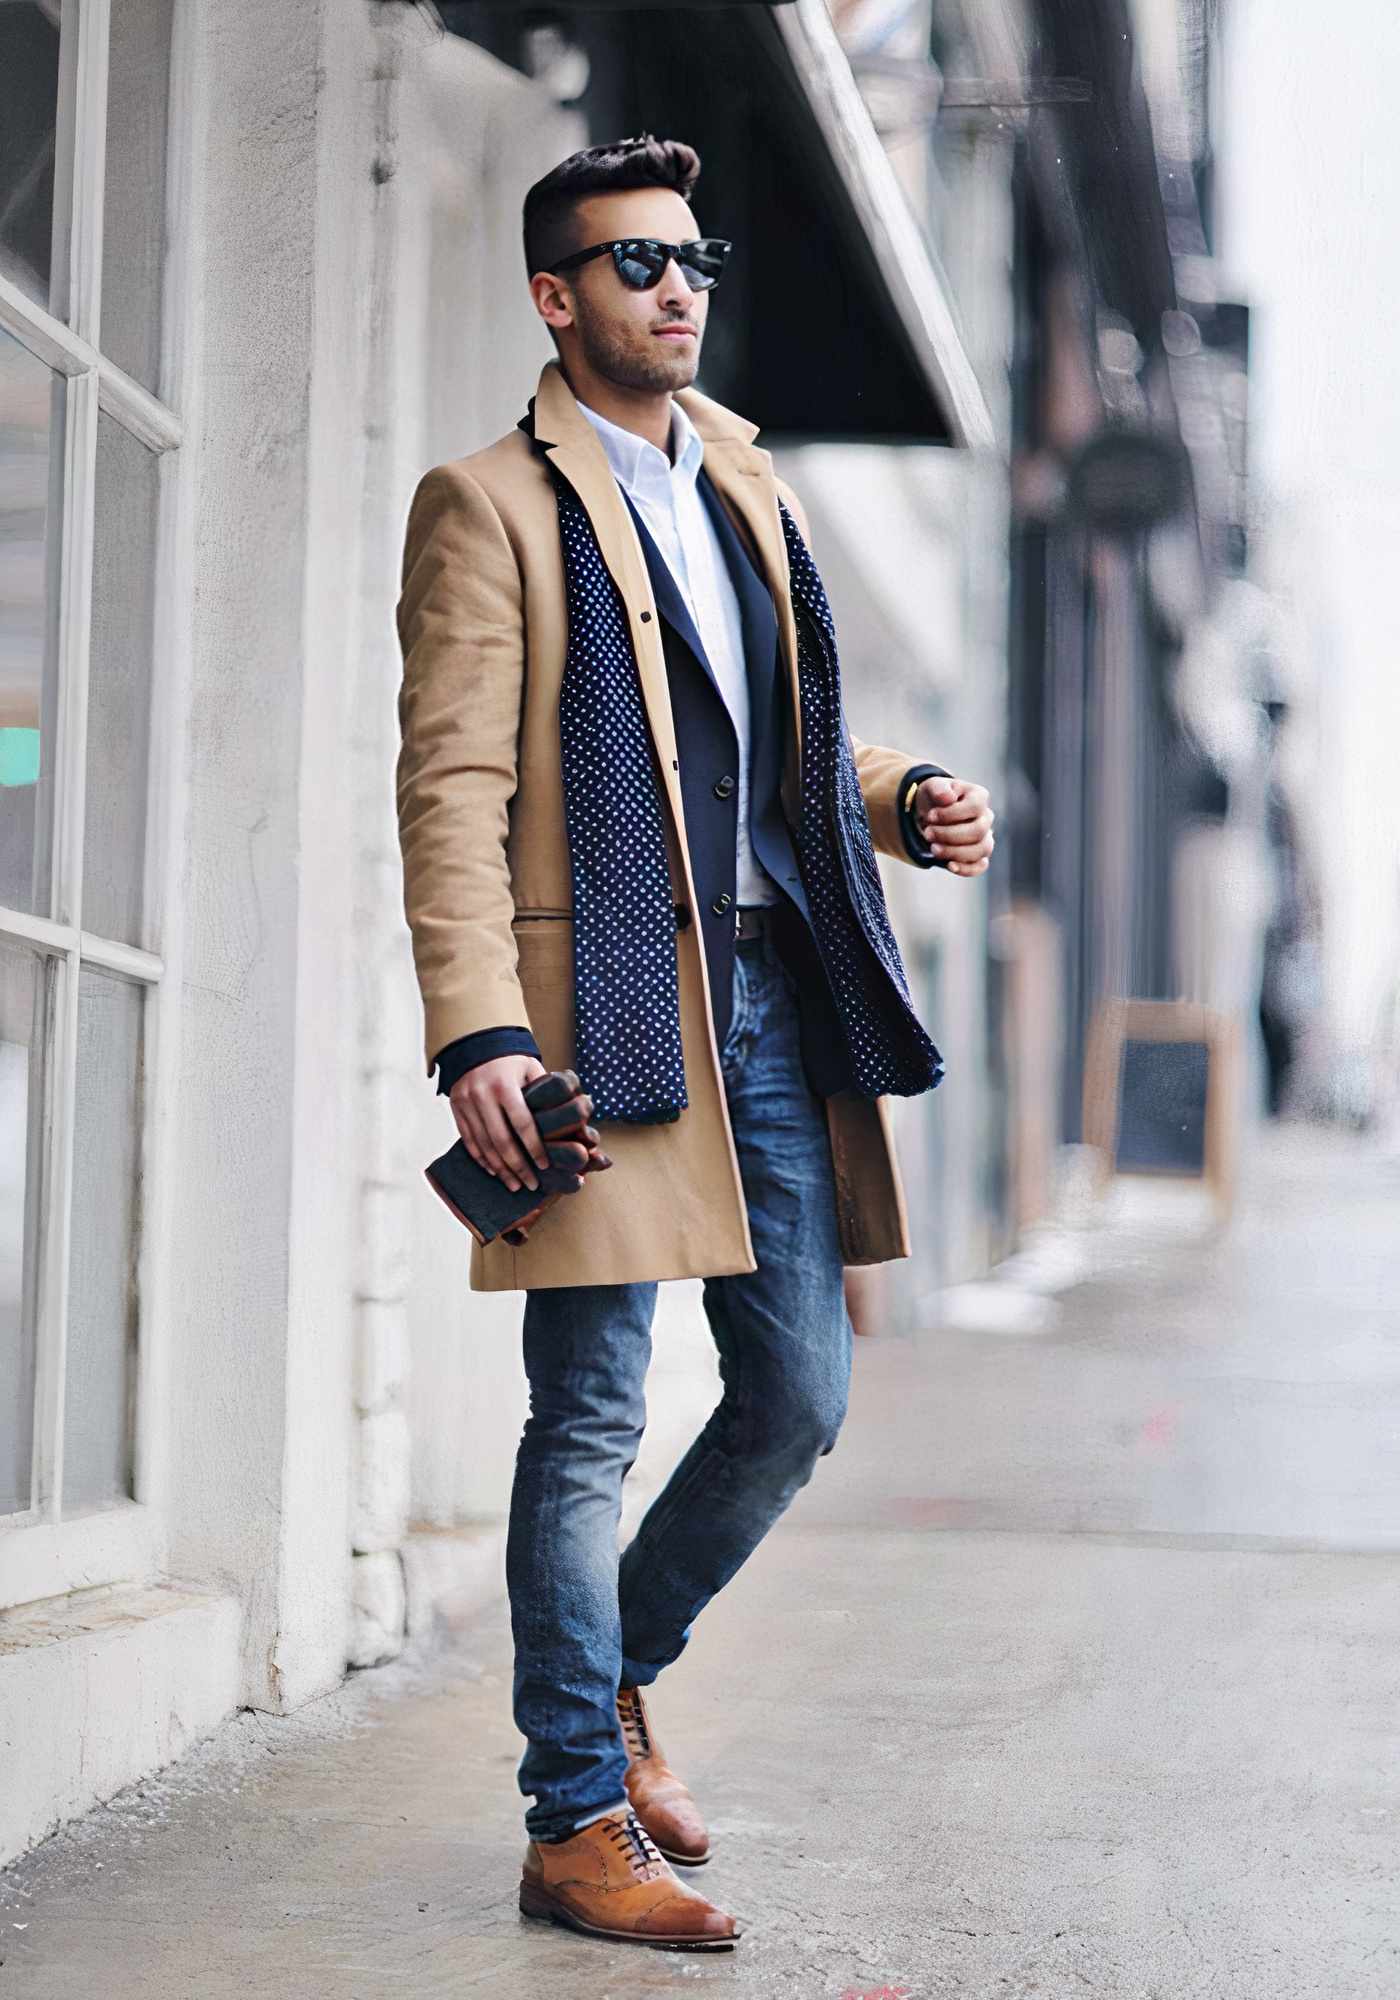 Tan overcoat over a white dress shirt and blue jeans